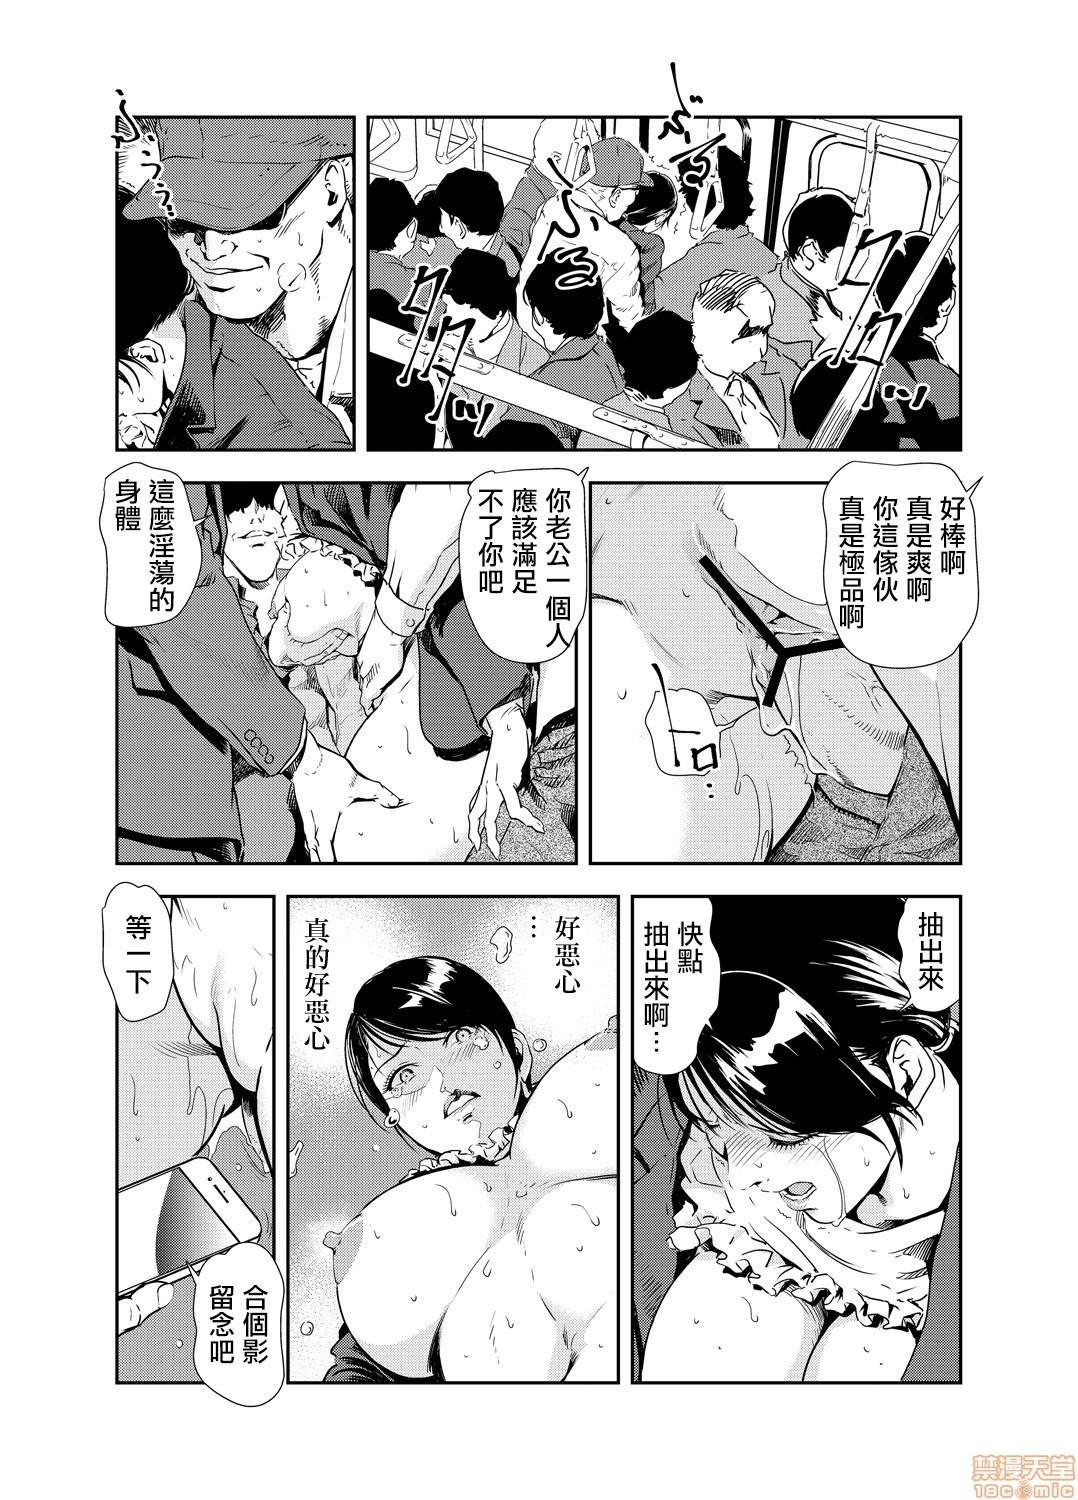 Stripper Chikan Express 17 Rimming - Page 3